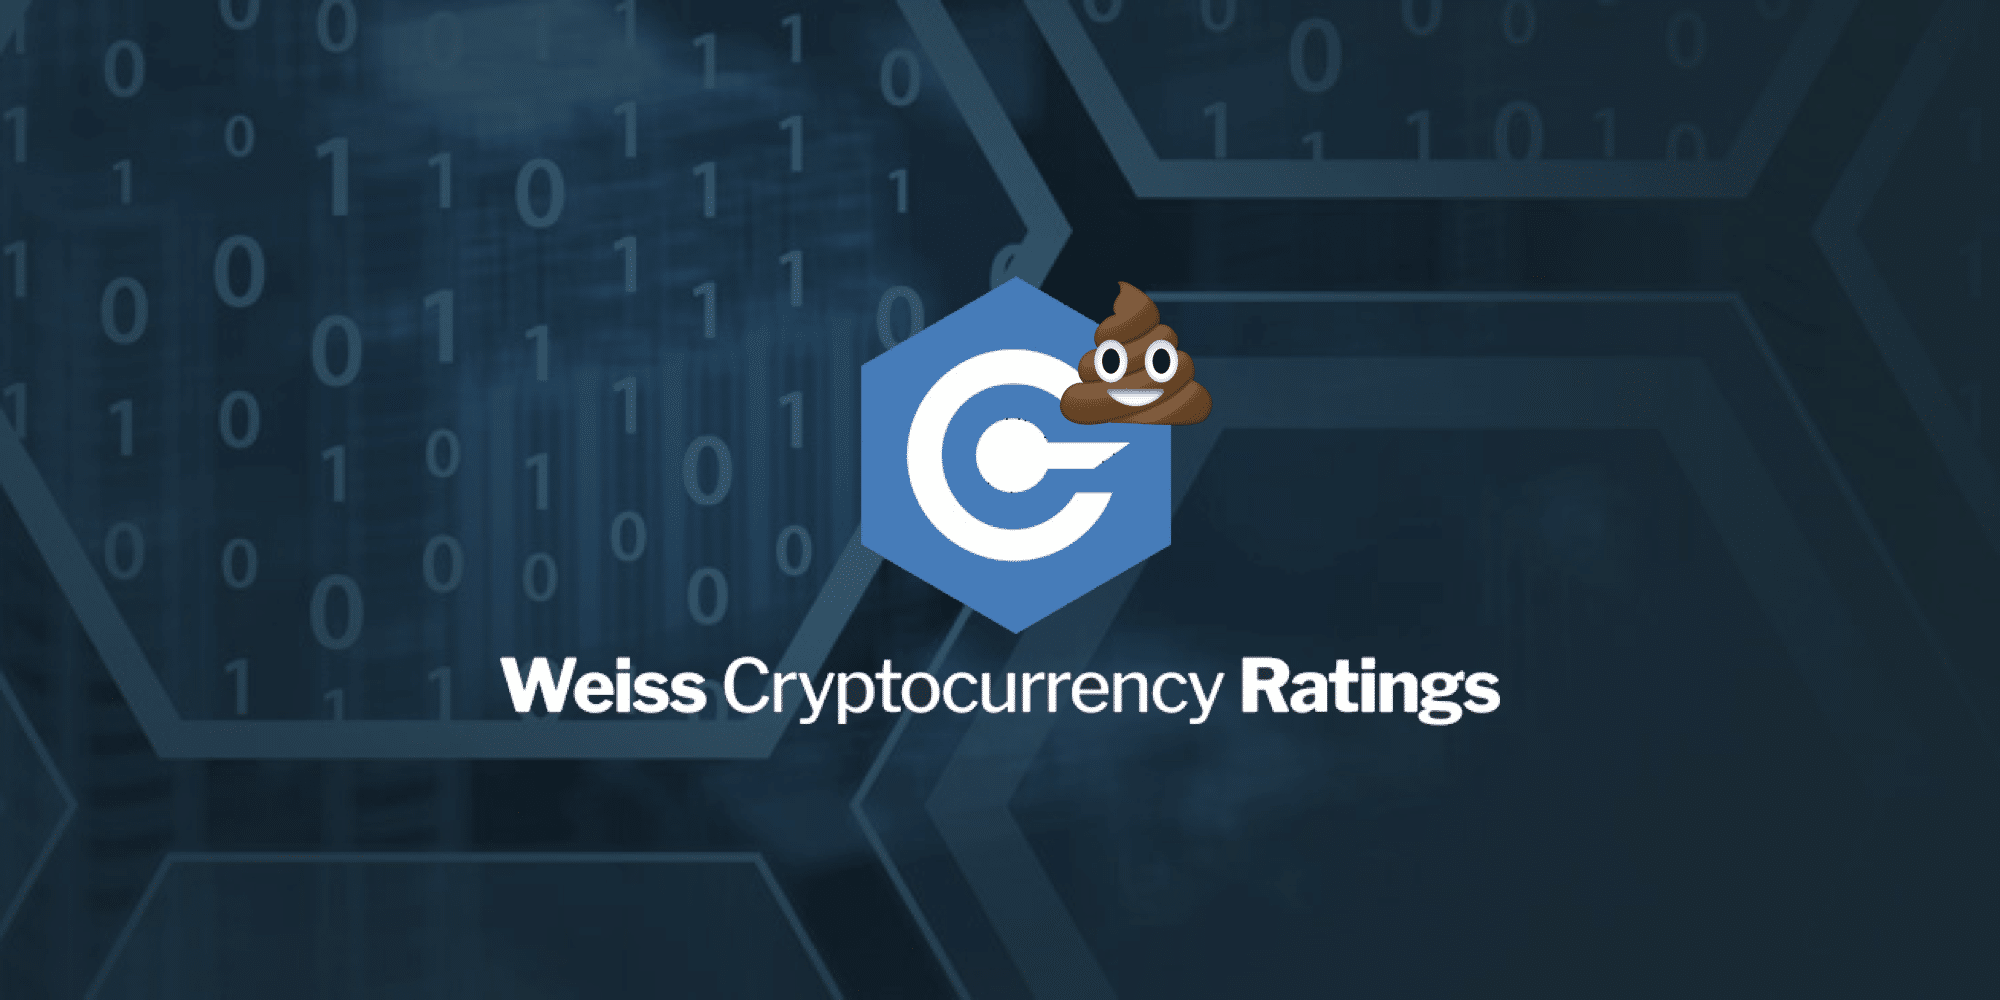 Cryptocurrency grades weiss how high can crypto com coin go